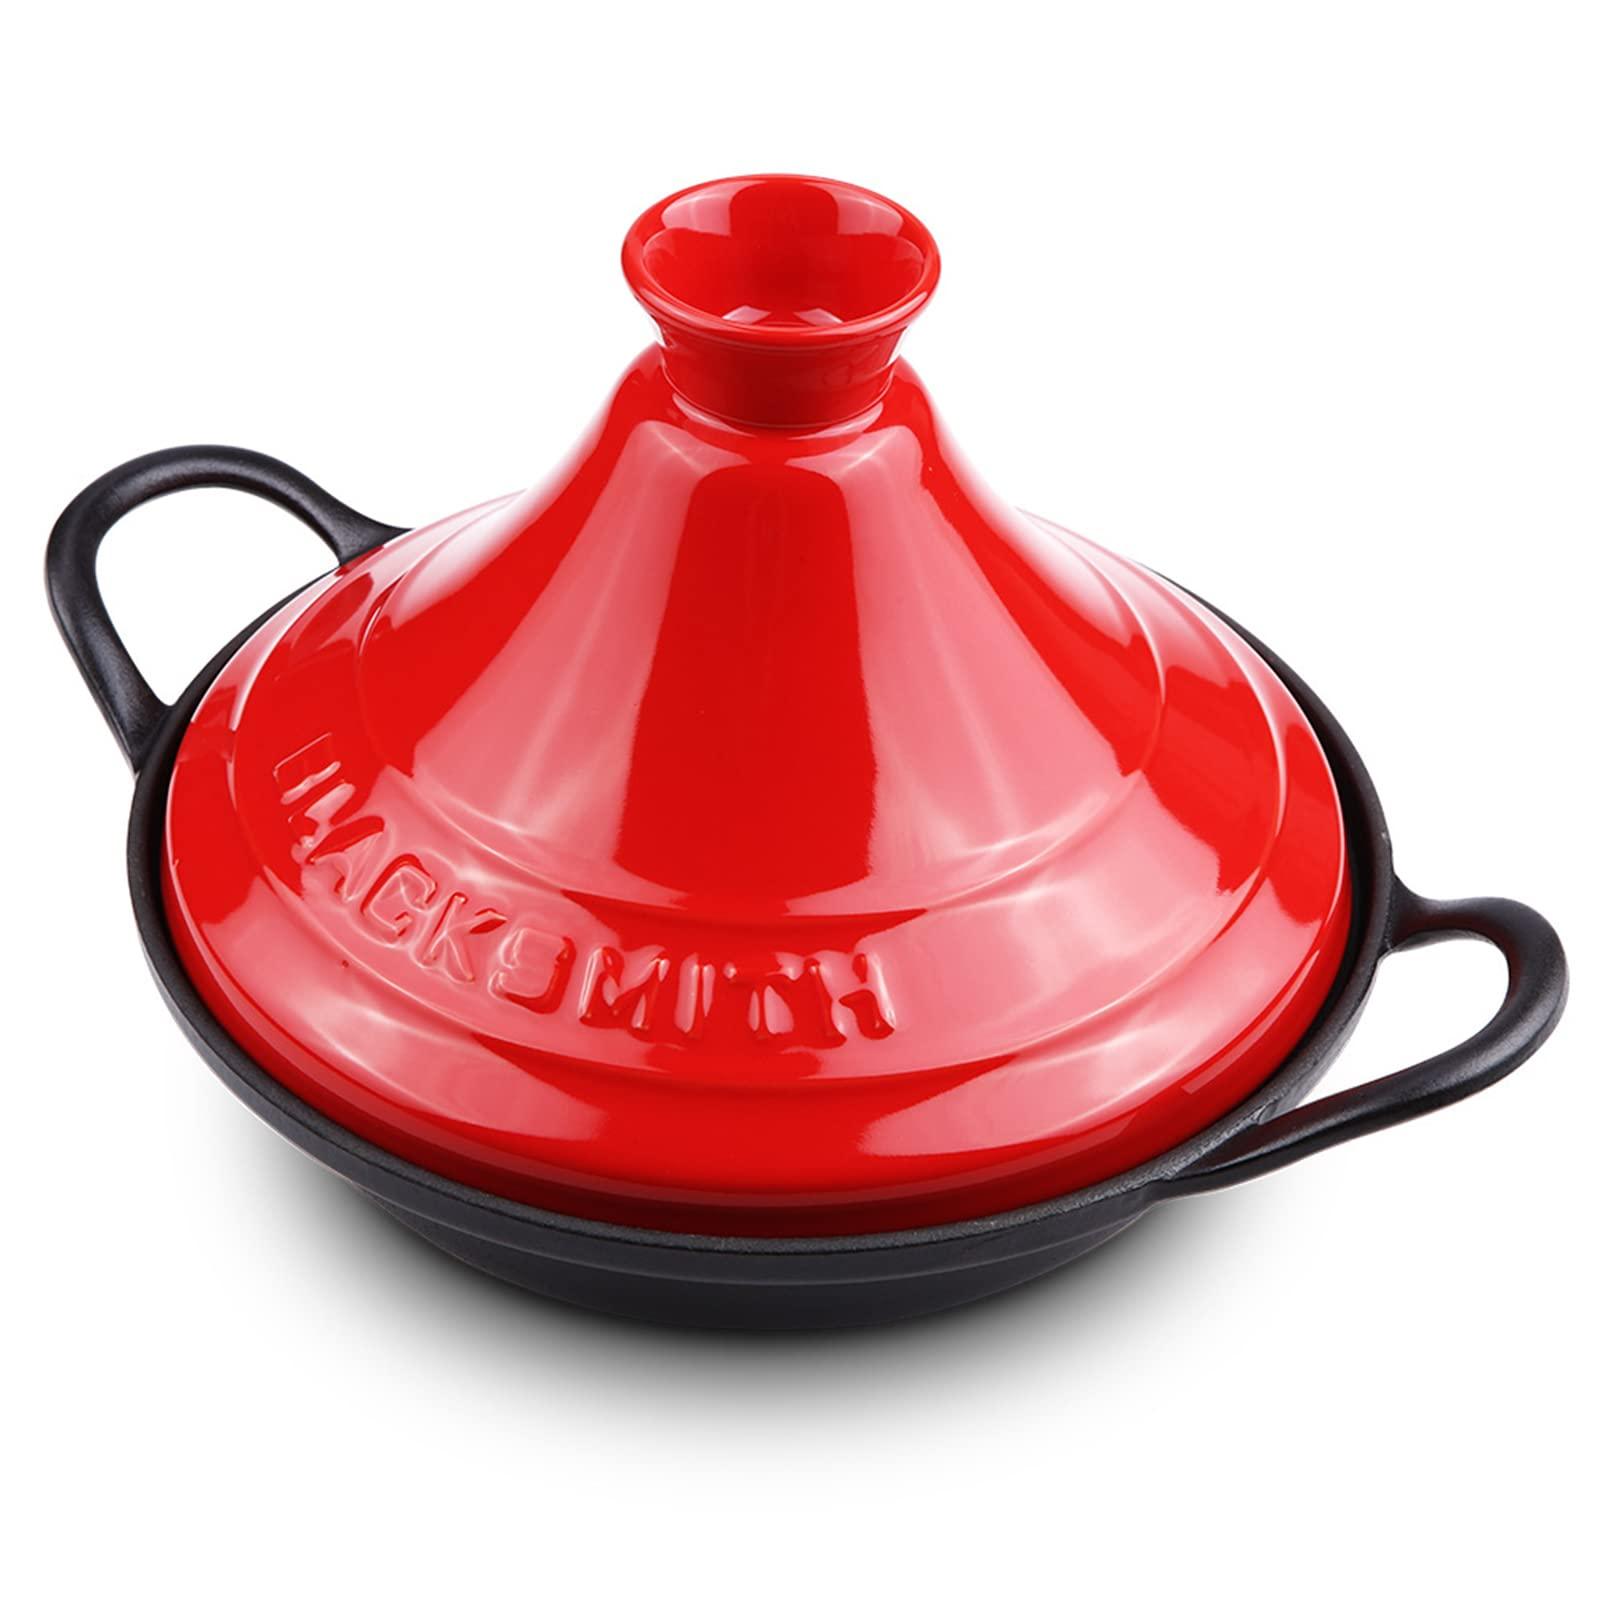 Moroccan Tagine Ceramic Pot Hand Made Tajine Cooking Cookware And Stew Casserole Slow Cooker with Cone-Shaped Closed Lid And Handle for Home Kitchen, Red - CookCave